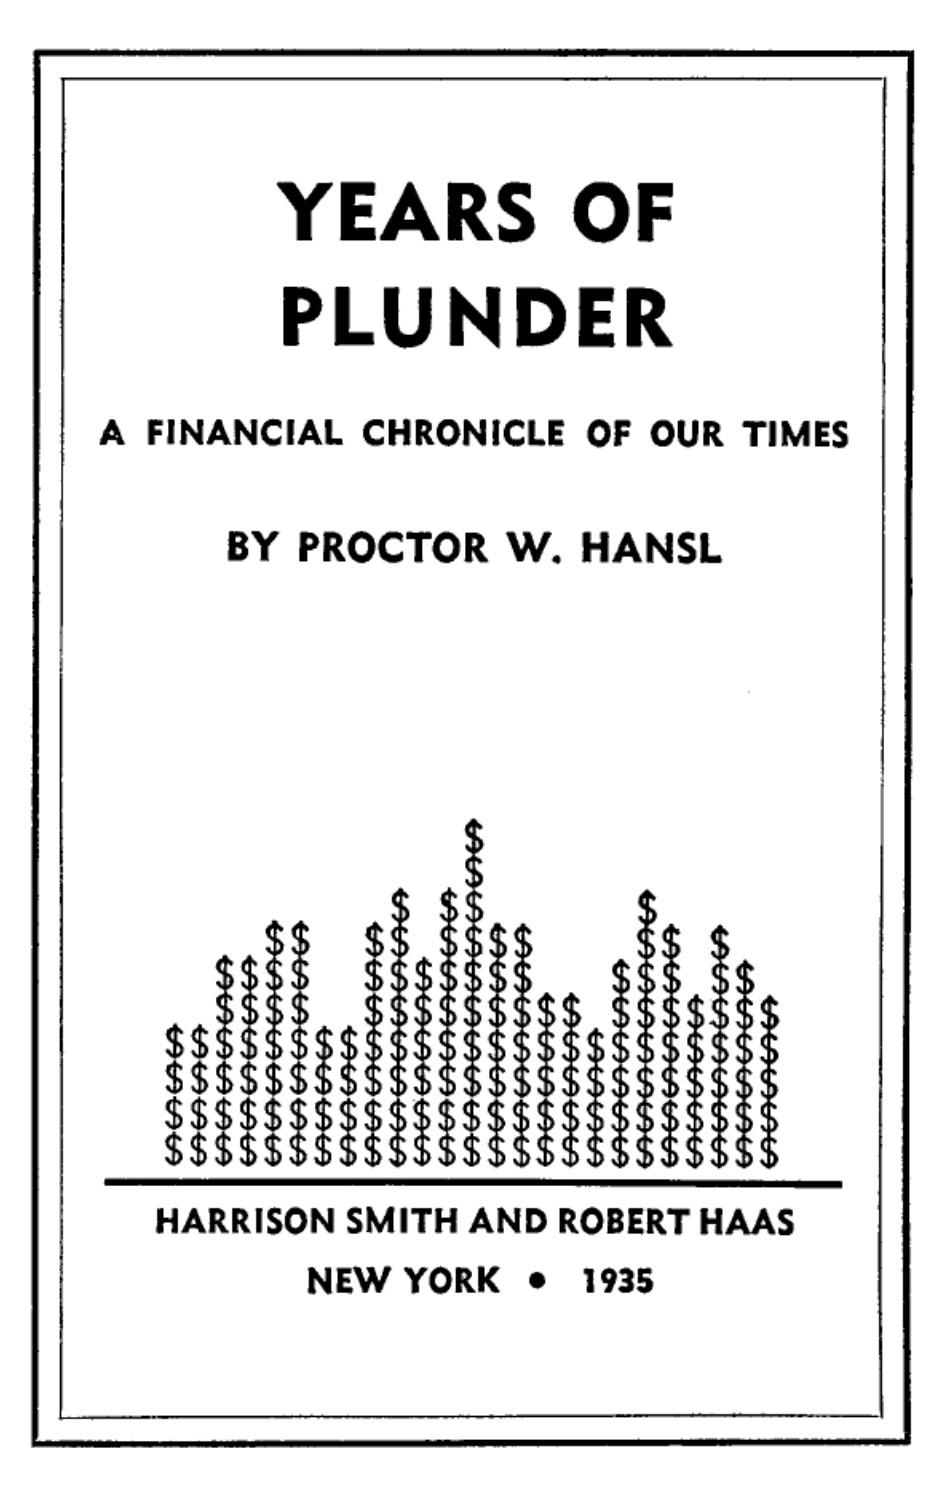 Years of Plunder: A Financial Chronicle of Our Times (1935) by Proctor W. Hansl